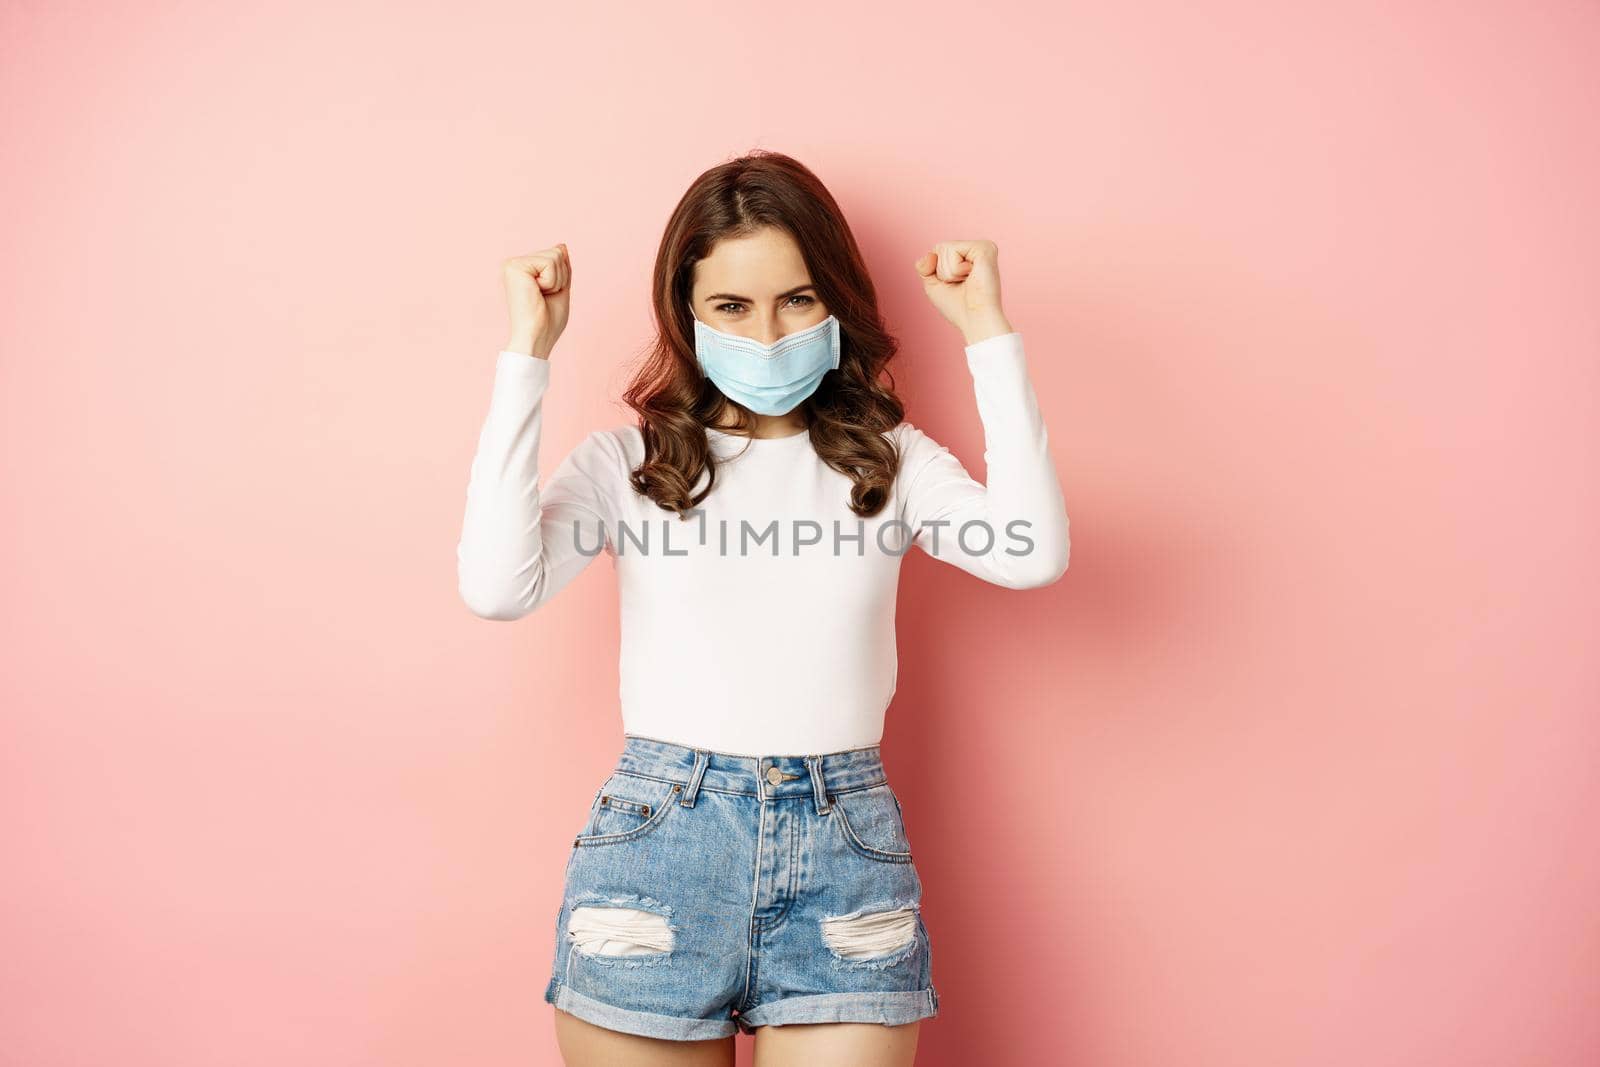 Enthusiastic brunette girl in medical face mask, dancing and laughing, celebrating victory, triumphing, winning smth, standing over pink background.